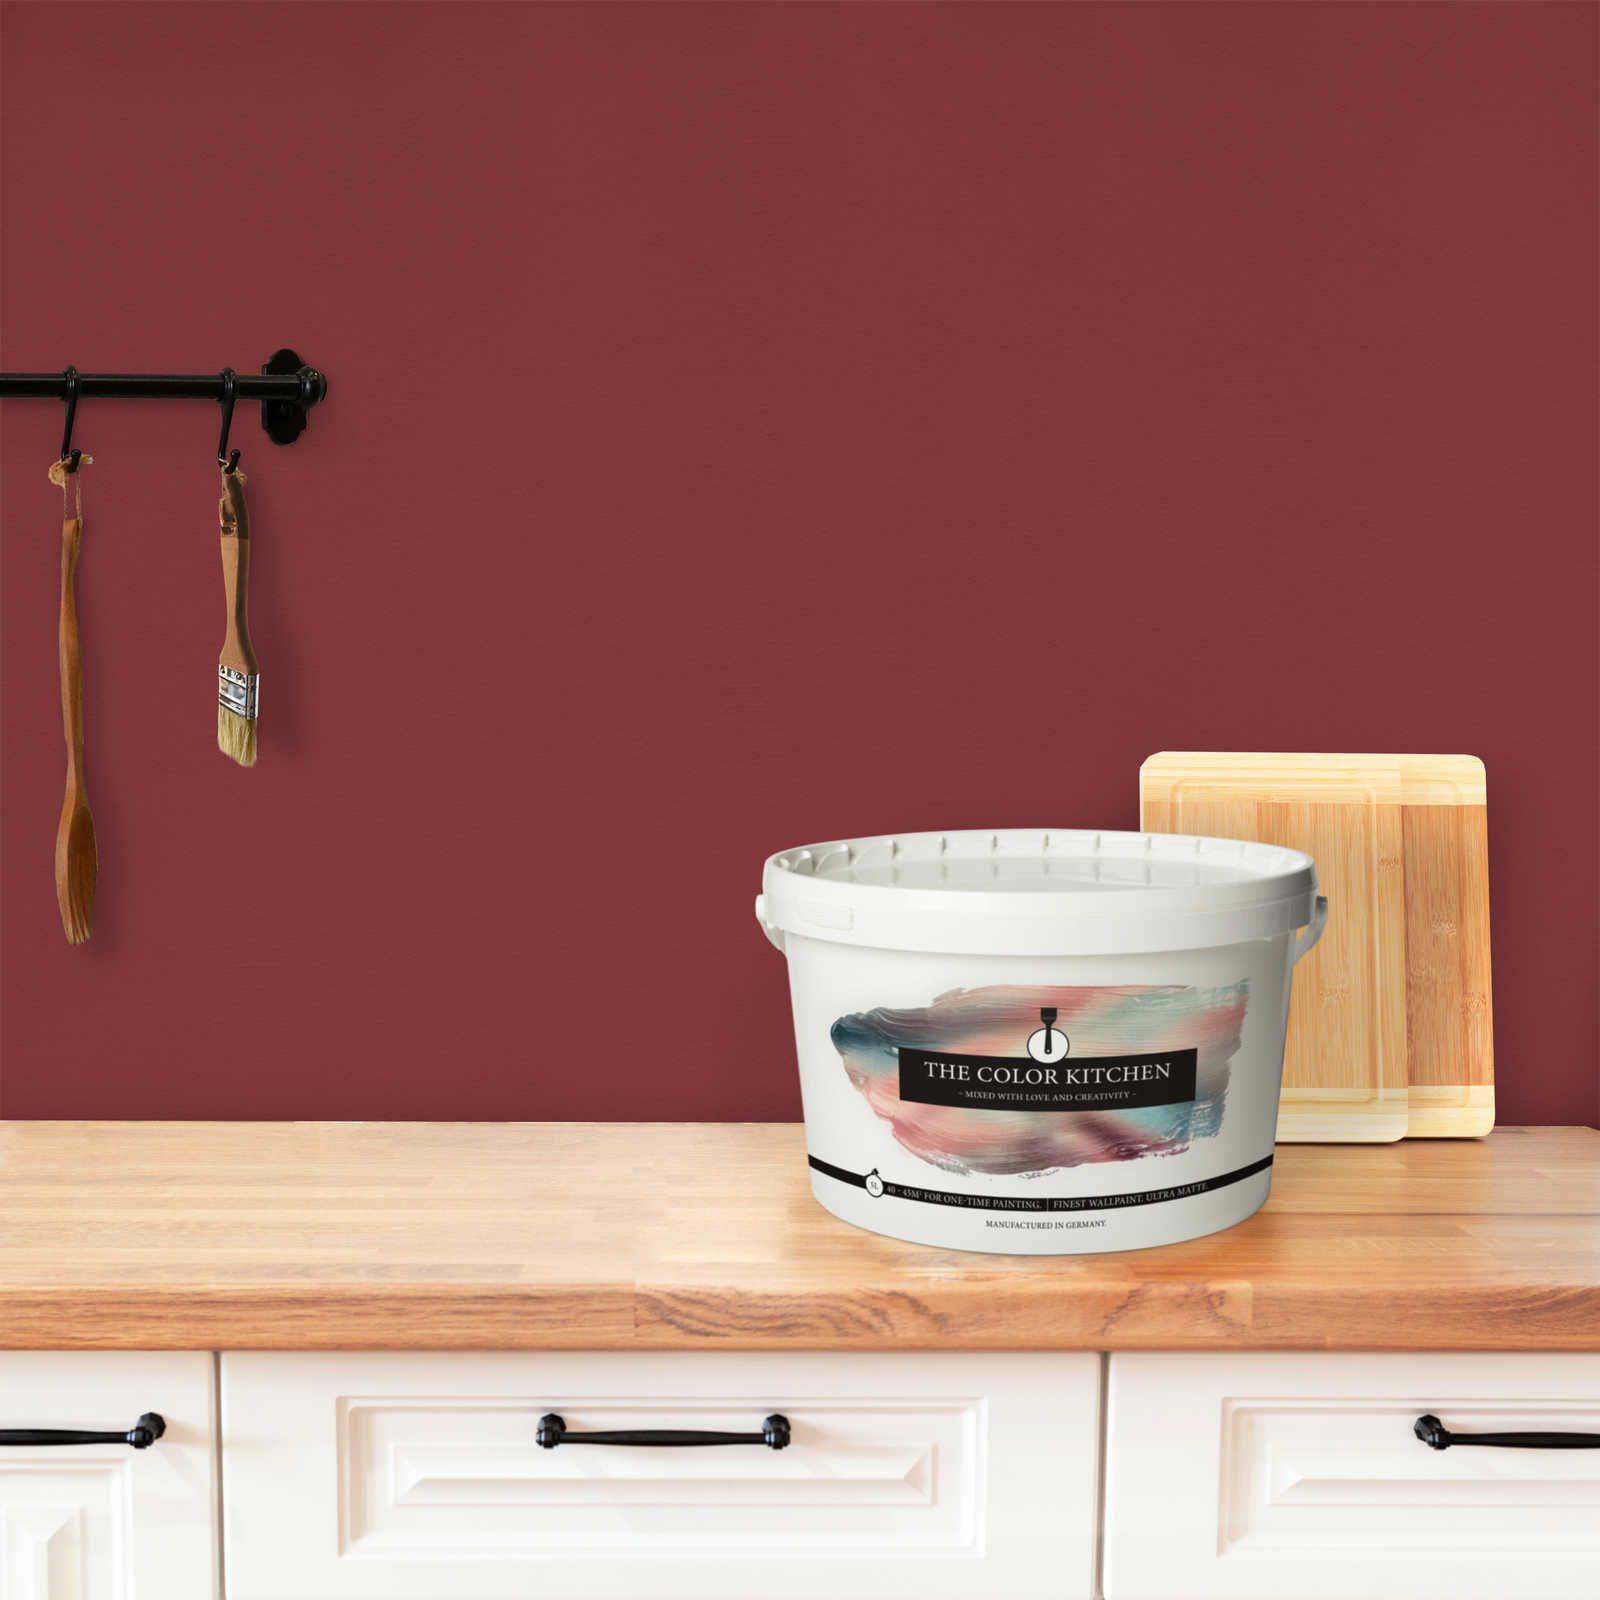             Wall Paint TCK7006 »Perky Pomegranate« in passionate dark red – 5.0 litre
        